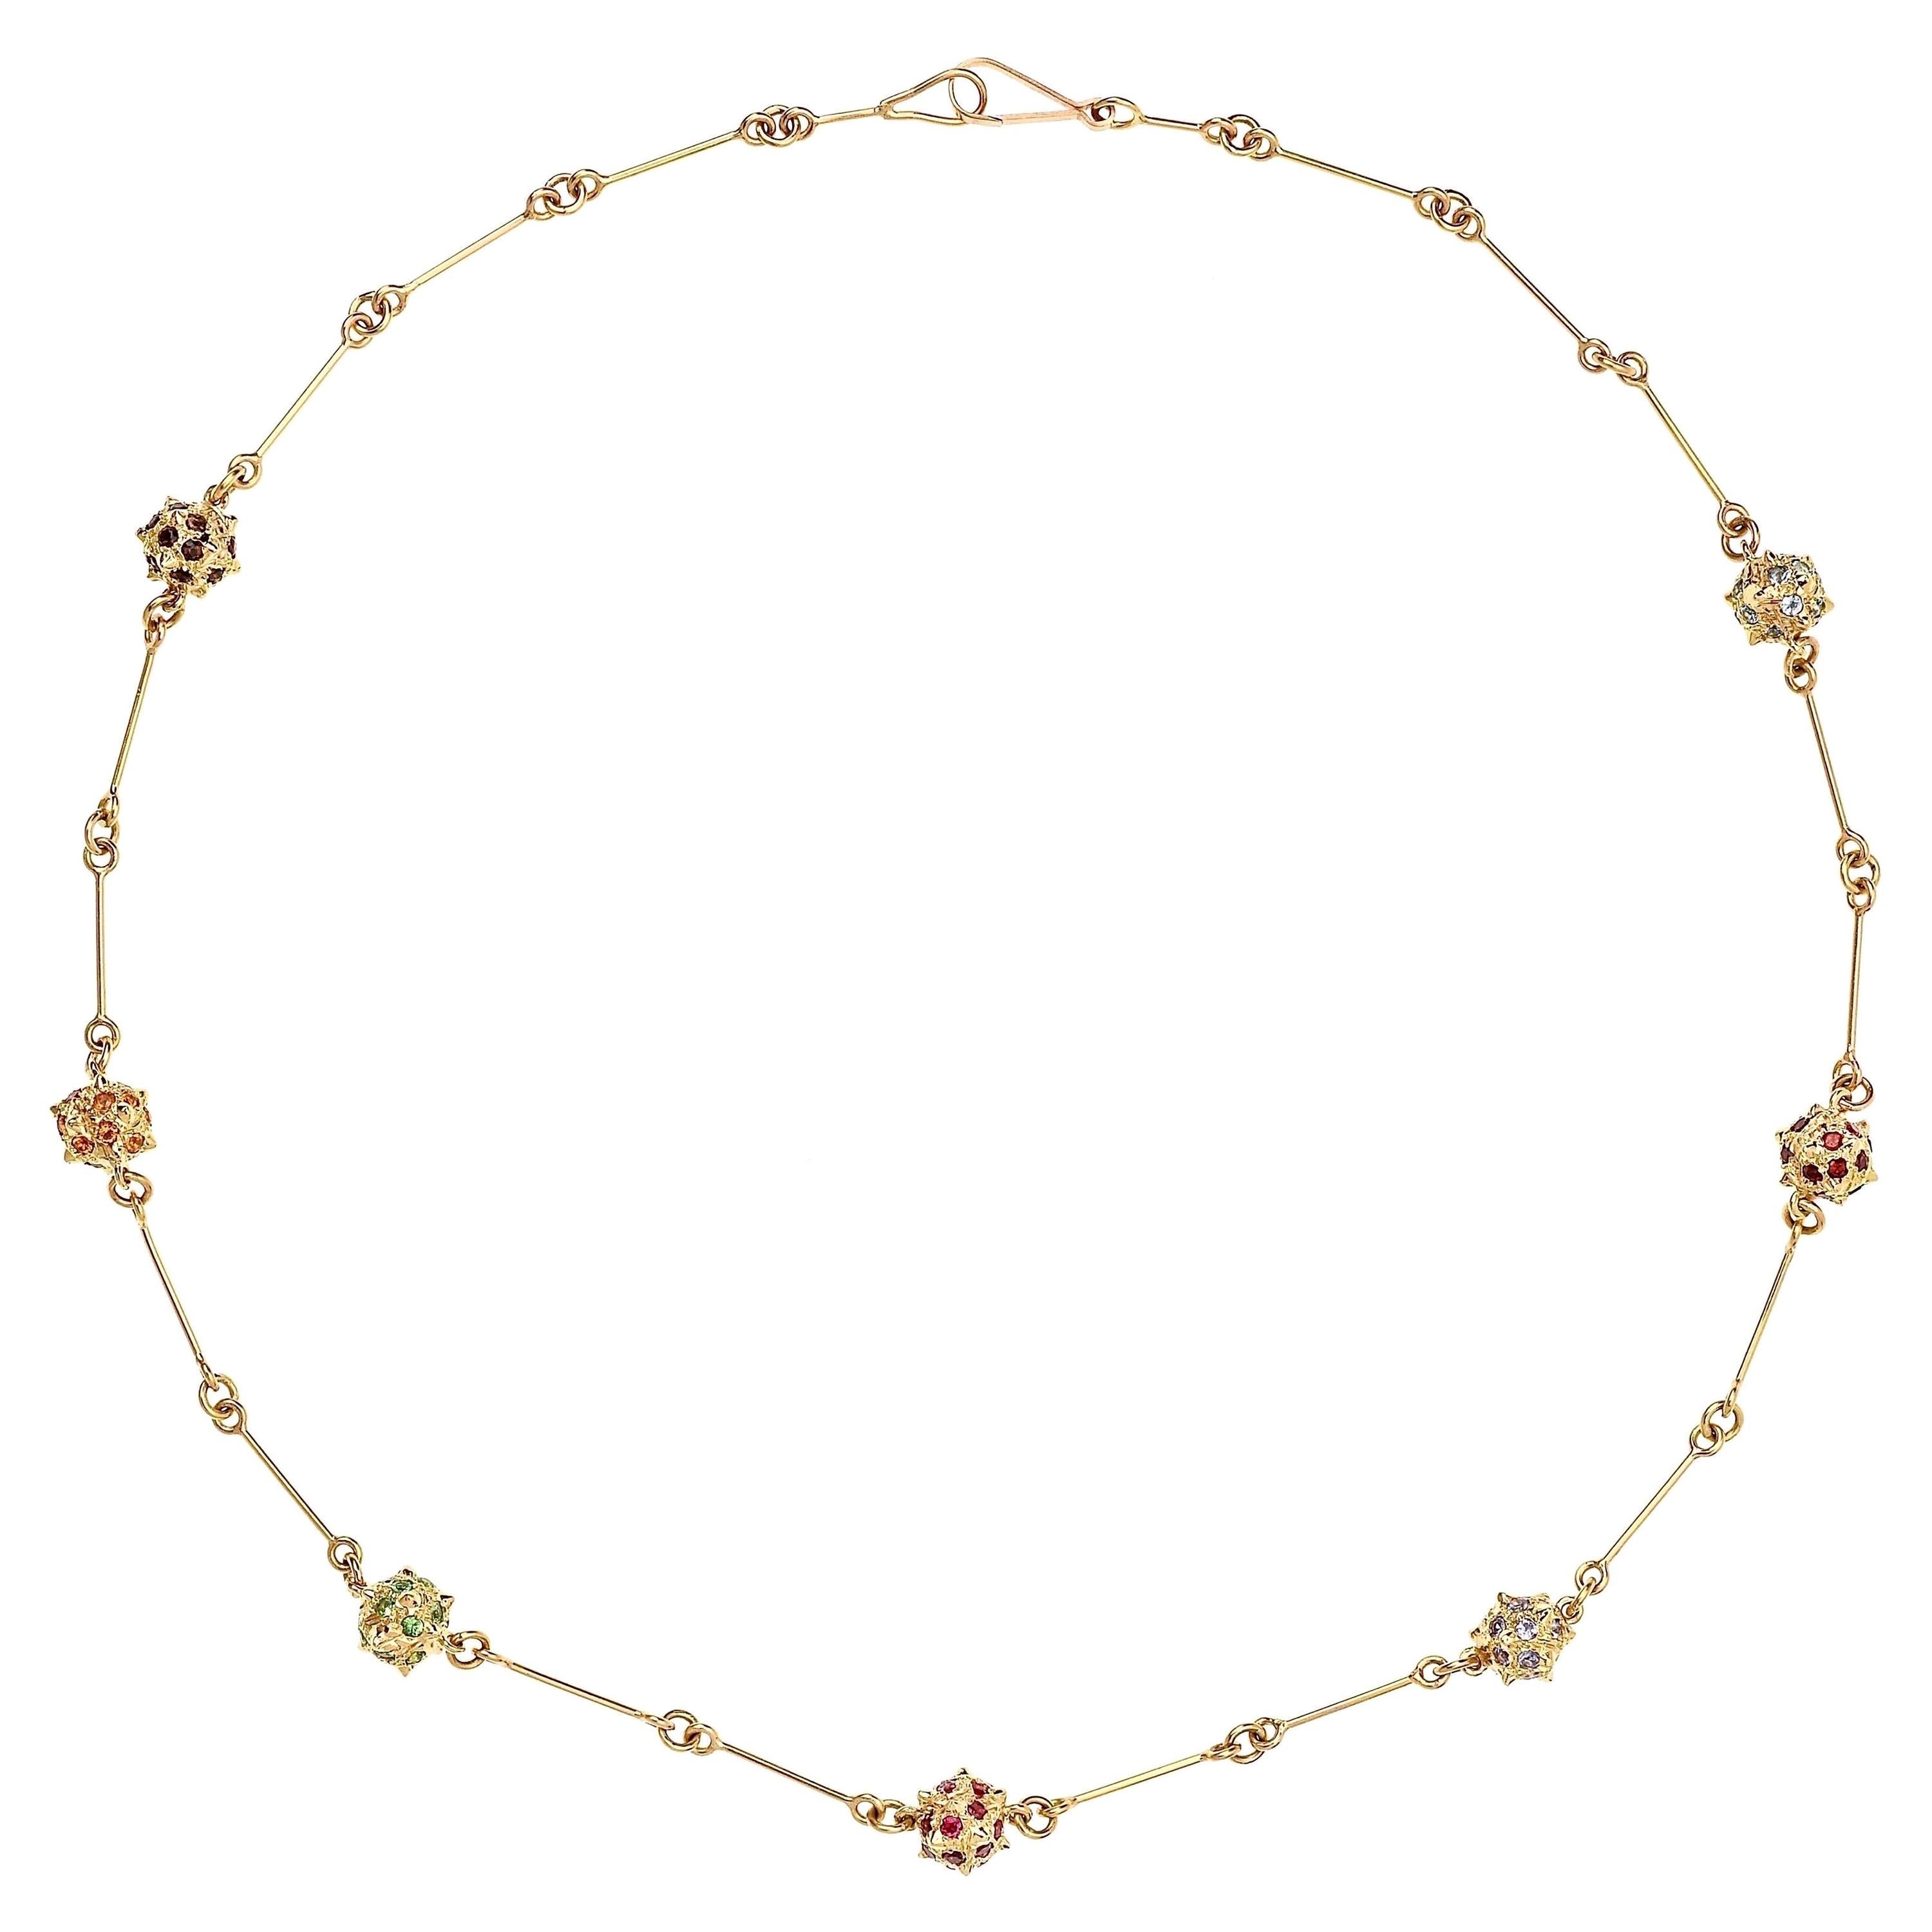 Contemporary 18K Yellow Gold, Sphere Chain Necklace with Multicoloured Gemstones